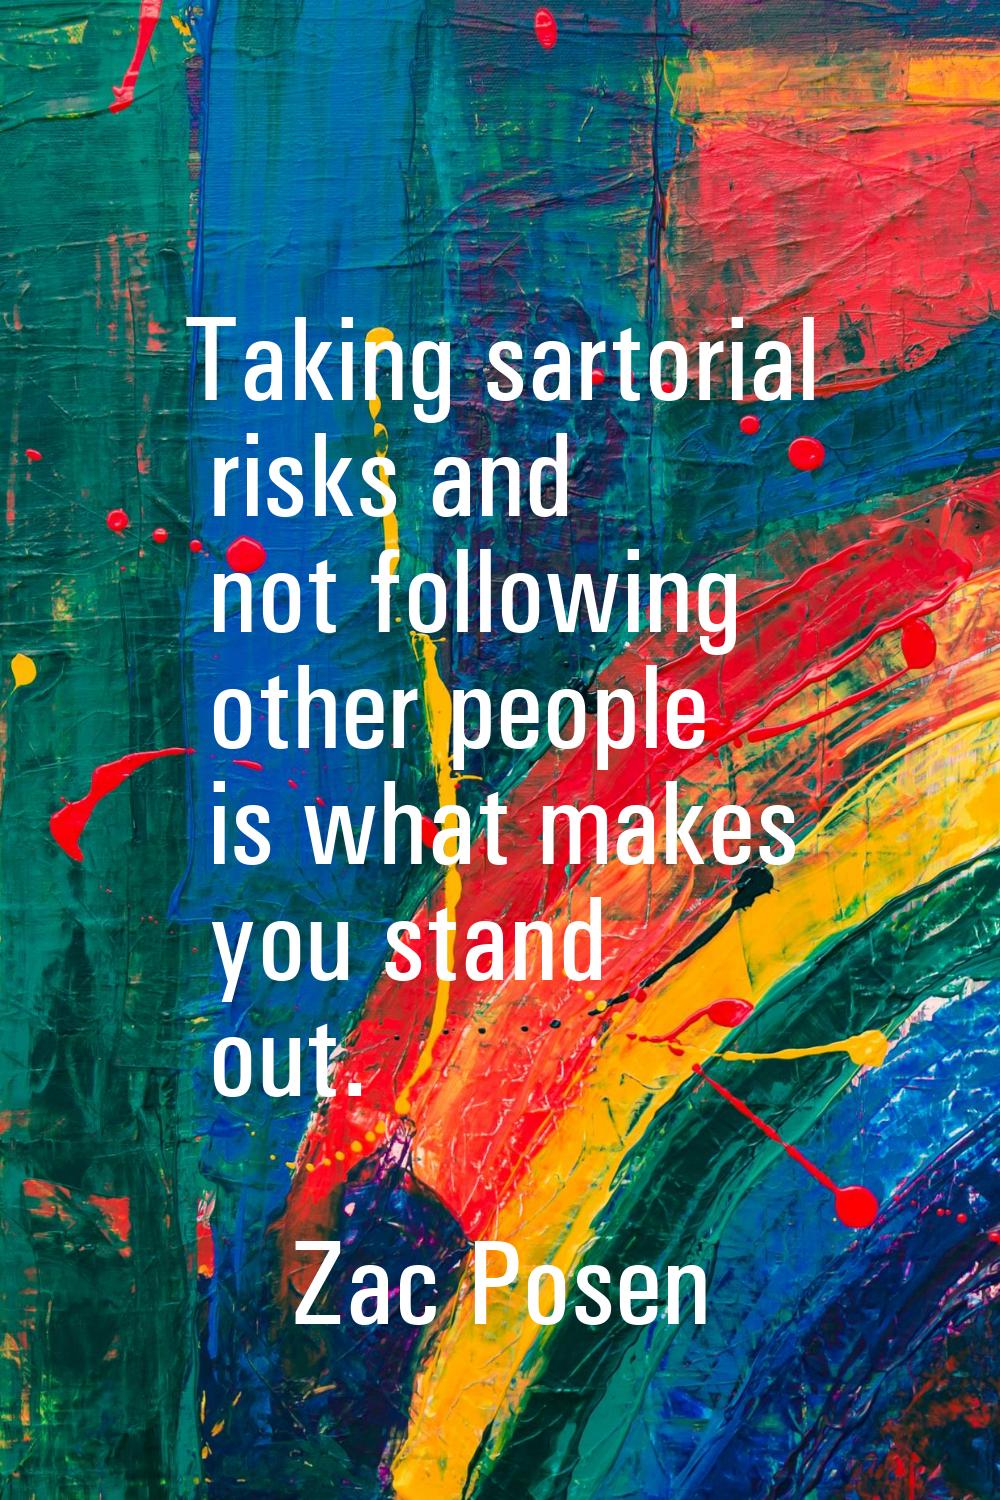 Taking sartorial risks and not following other people is what makes you stand out.